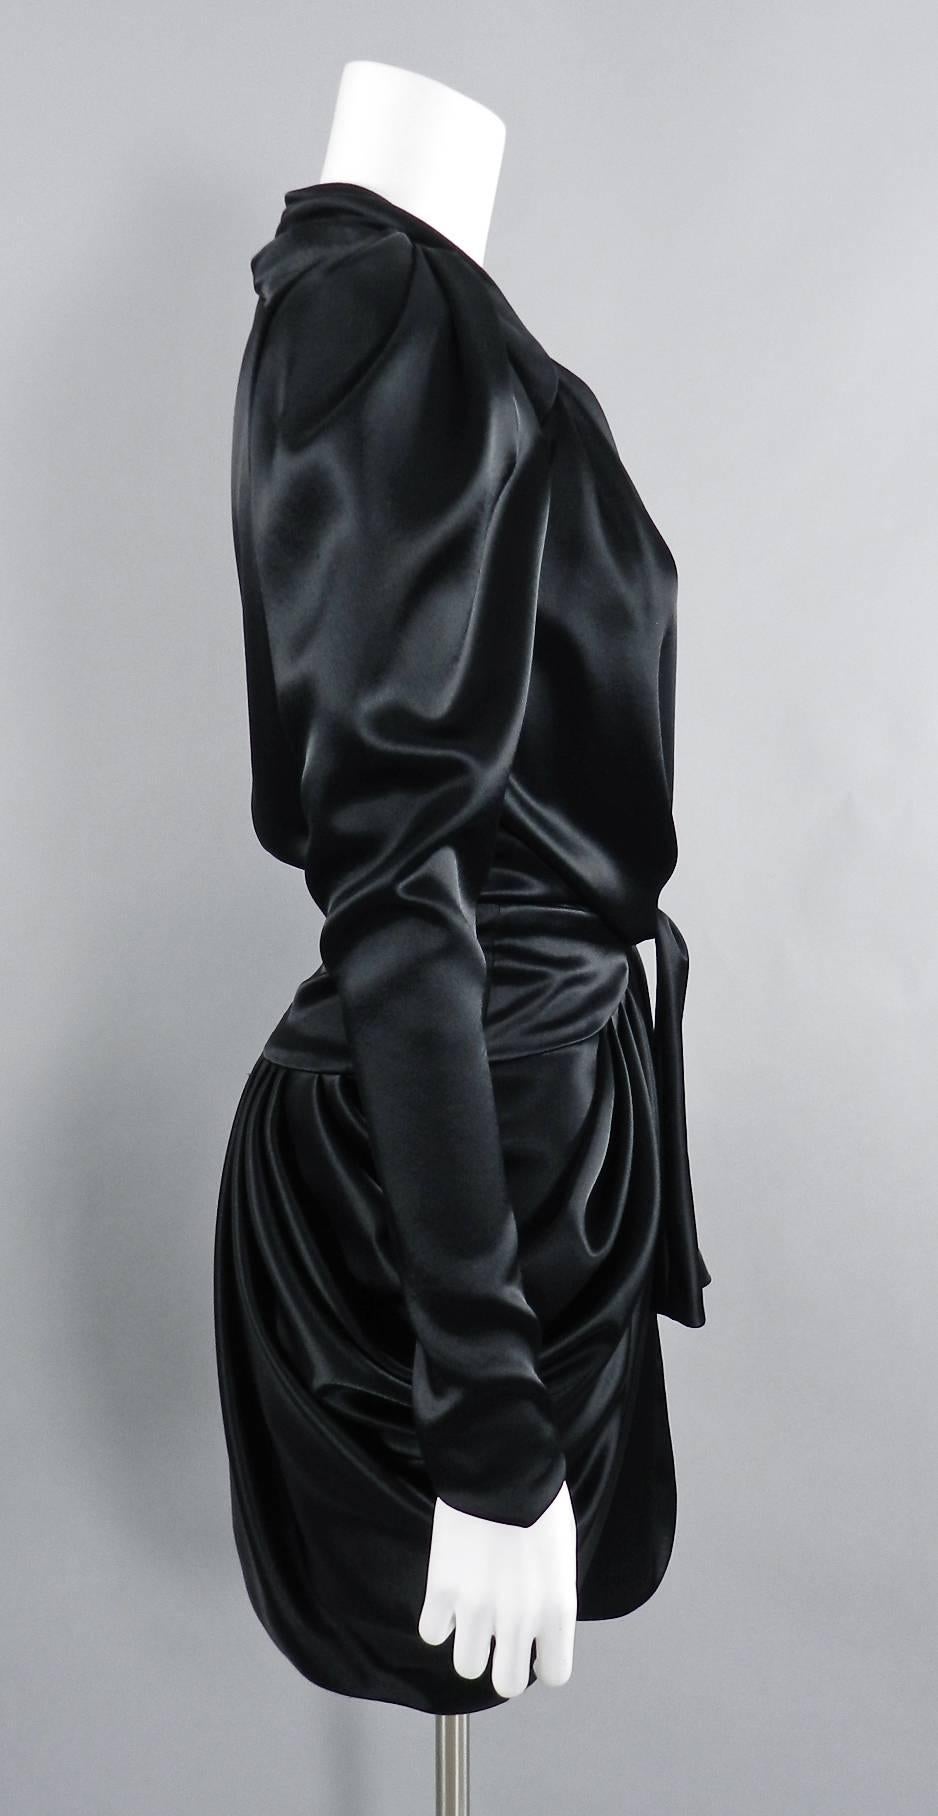 Balenciaga  by Nicholas Ghesquiere Fall 2009 Black Satin Gathered Dress.  Fastens at centre front with hidden hooks and snaps, ties at waist with sash at front, draped skirt, puff shoulders, tapered sleeves.  Tagged size FR 40 (USA 8). To fit